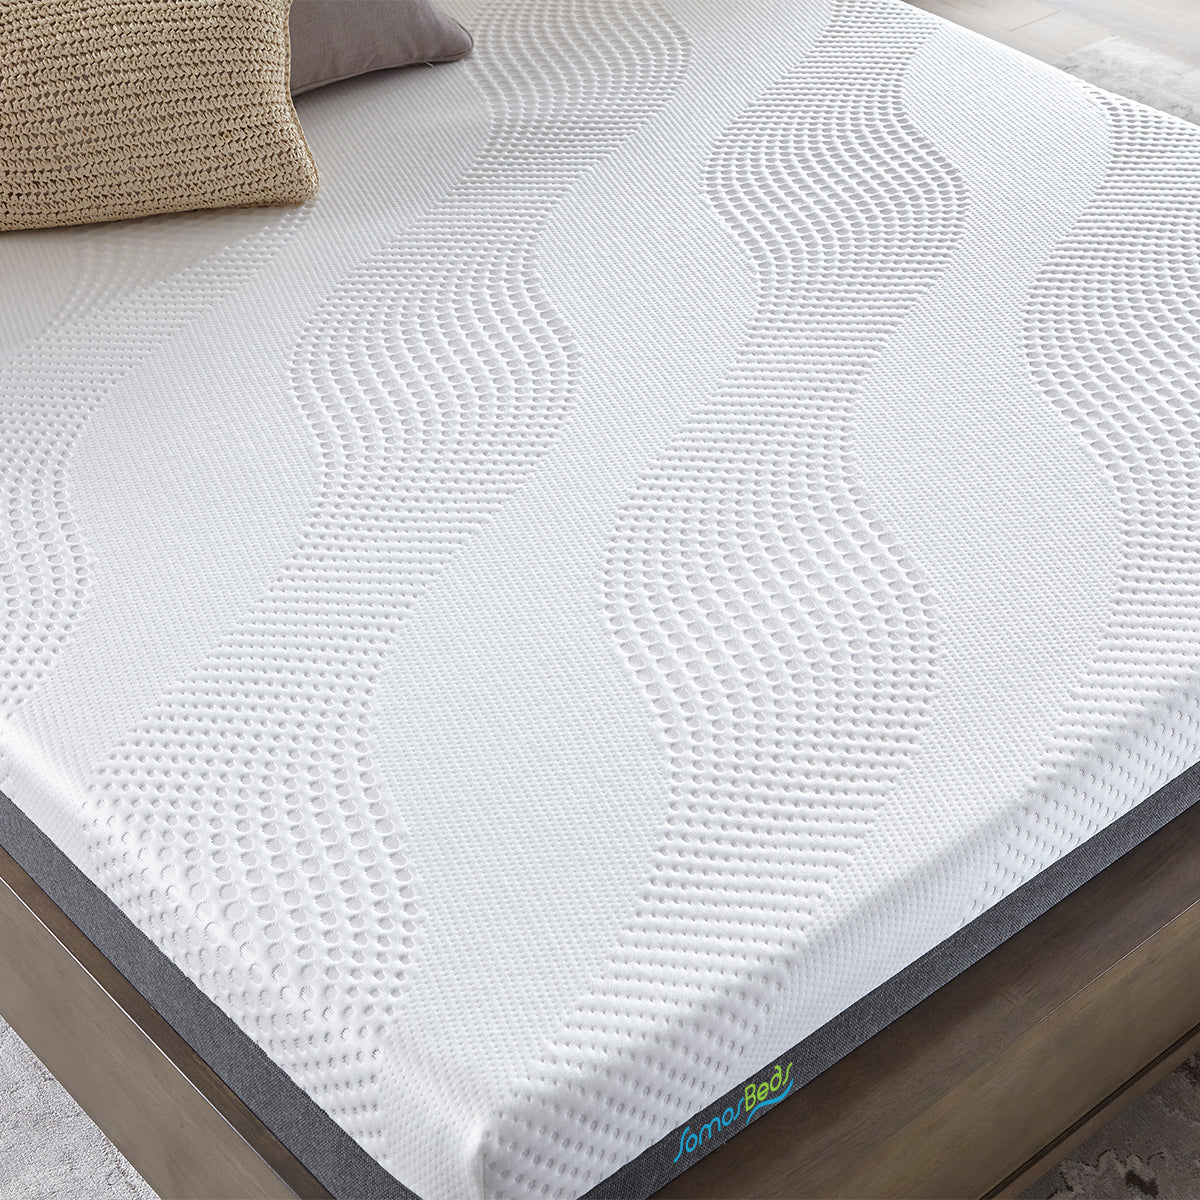 Elegance Memory Foam Mattress by SomosBeds Fabric Cover Detail